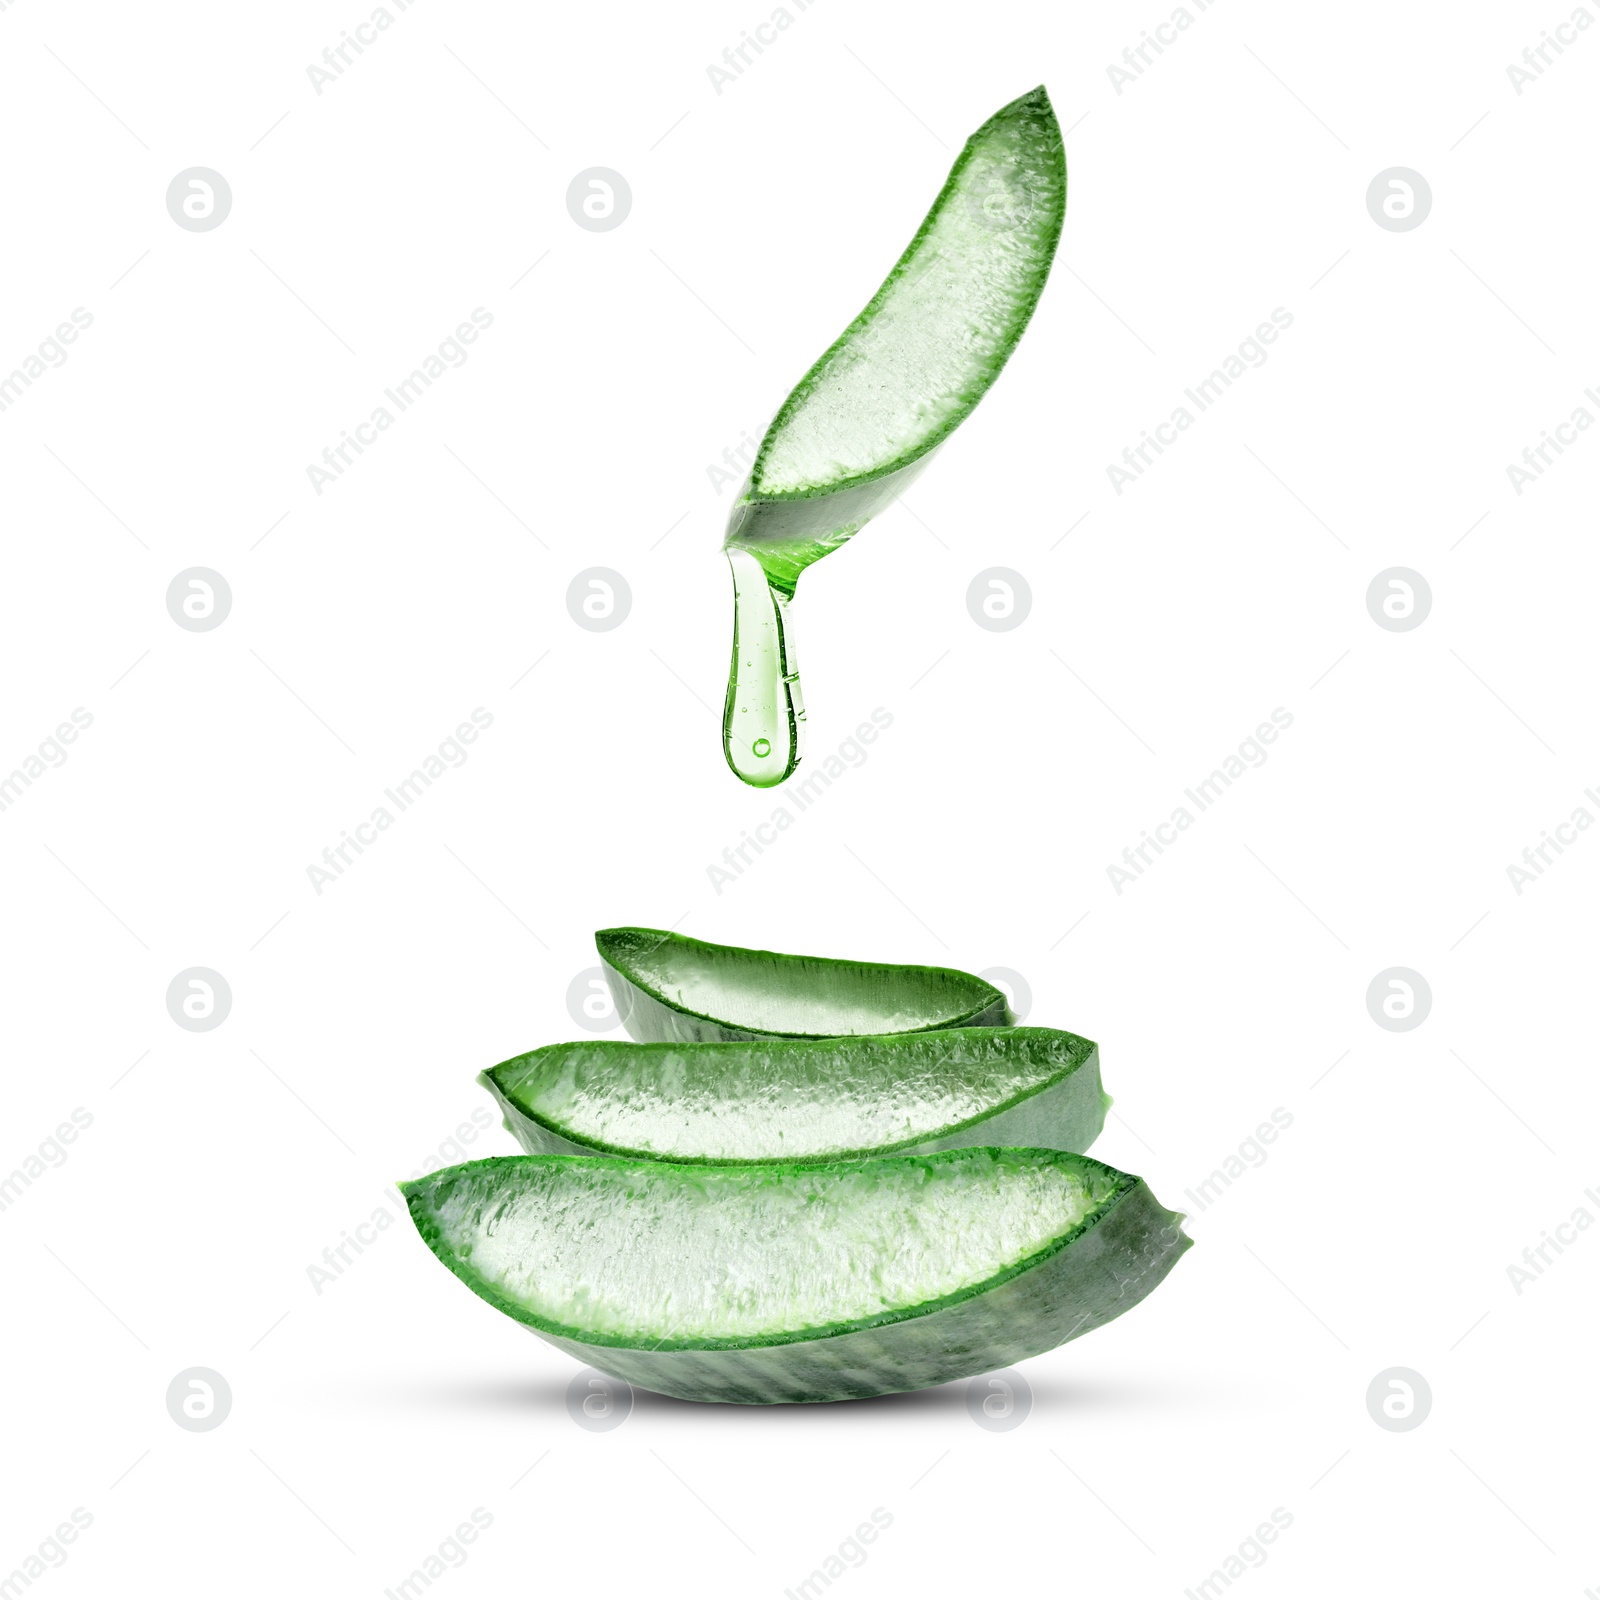 Image of Aloe vera juice dripping from green leaf section on white background